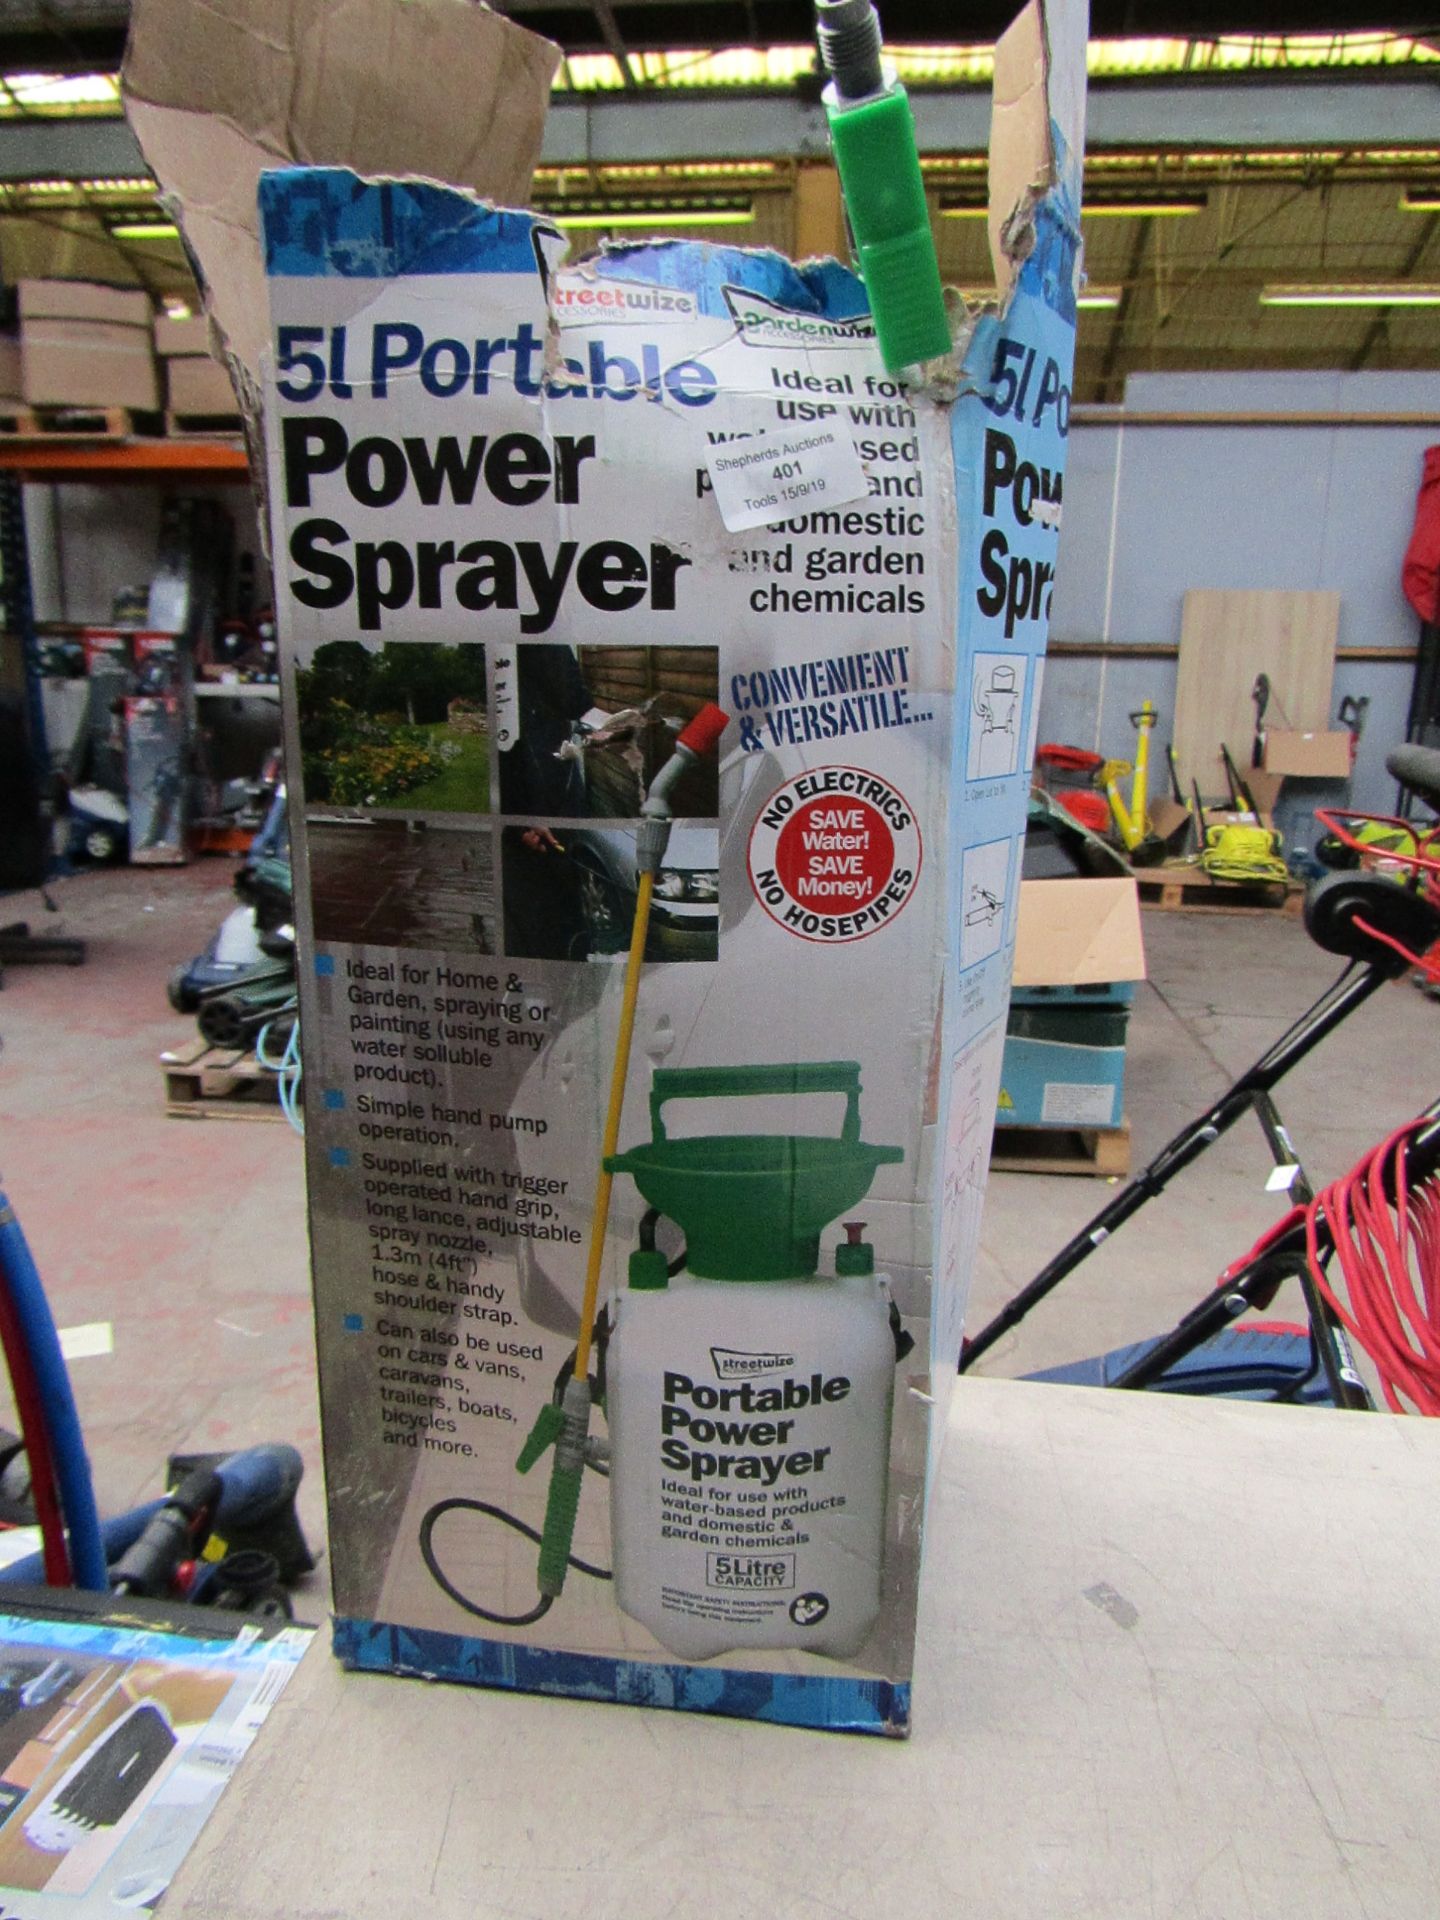 Streetwise 5Ltr power sprayer, boxed and unchecked